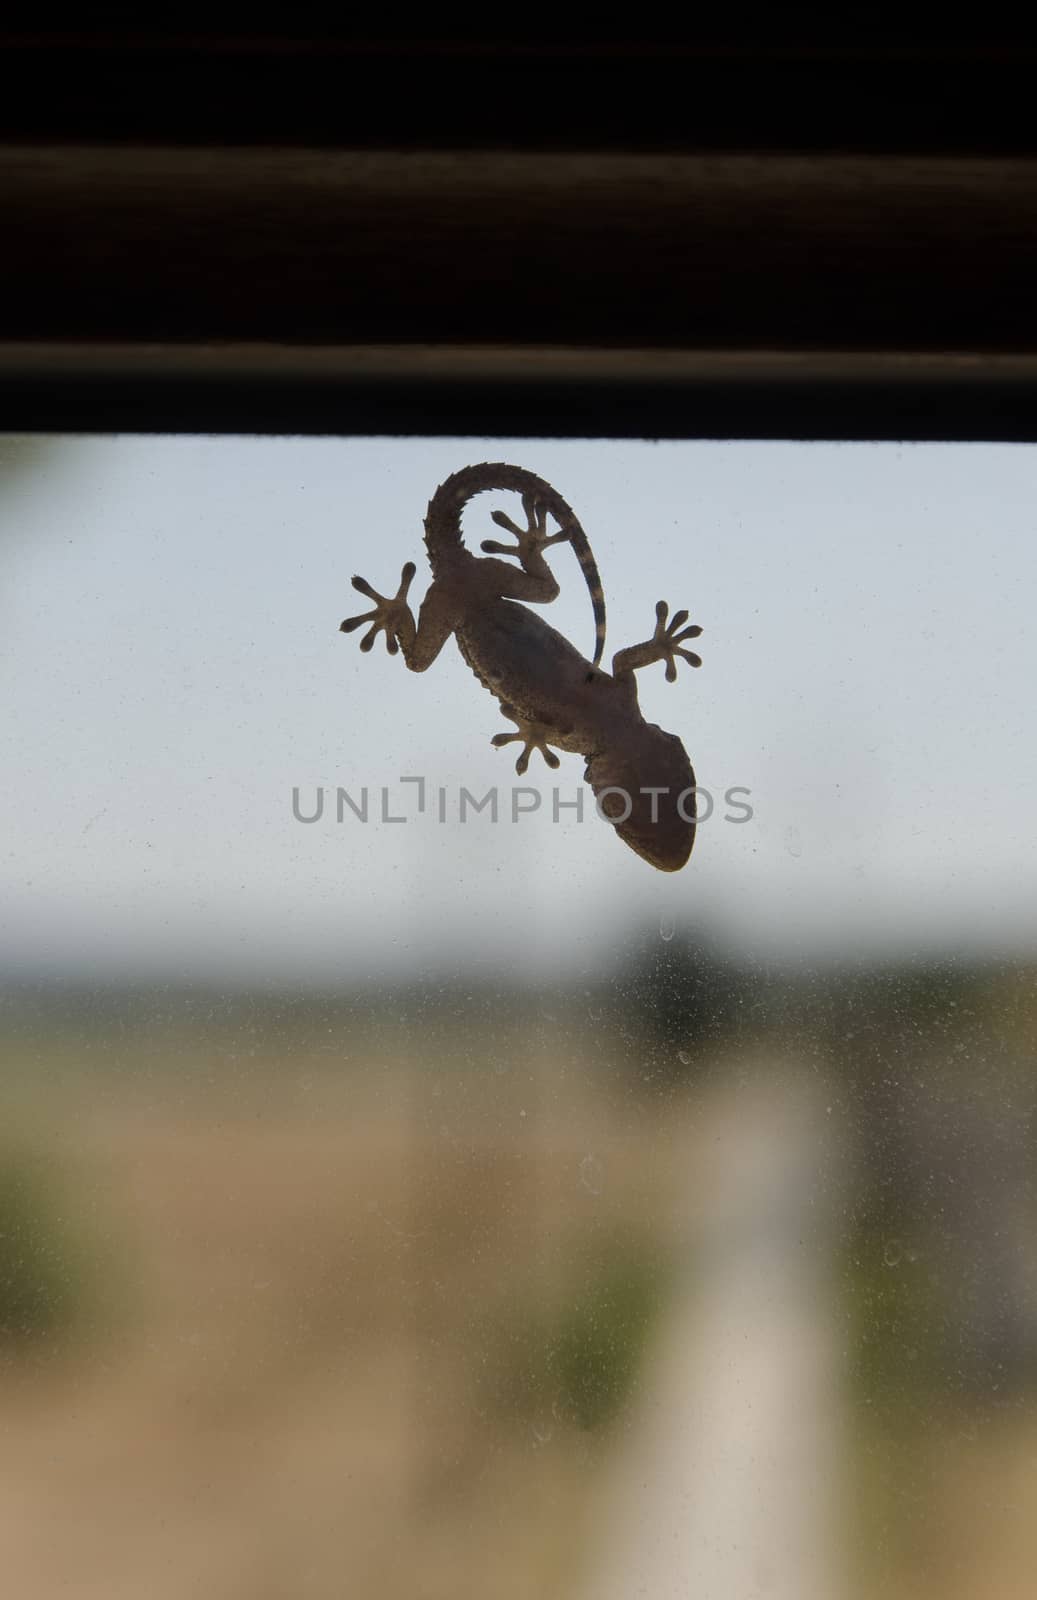 View of a small gecko on a window